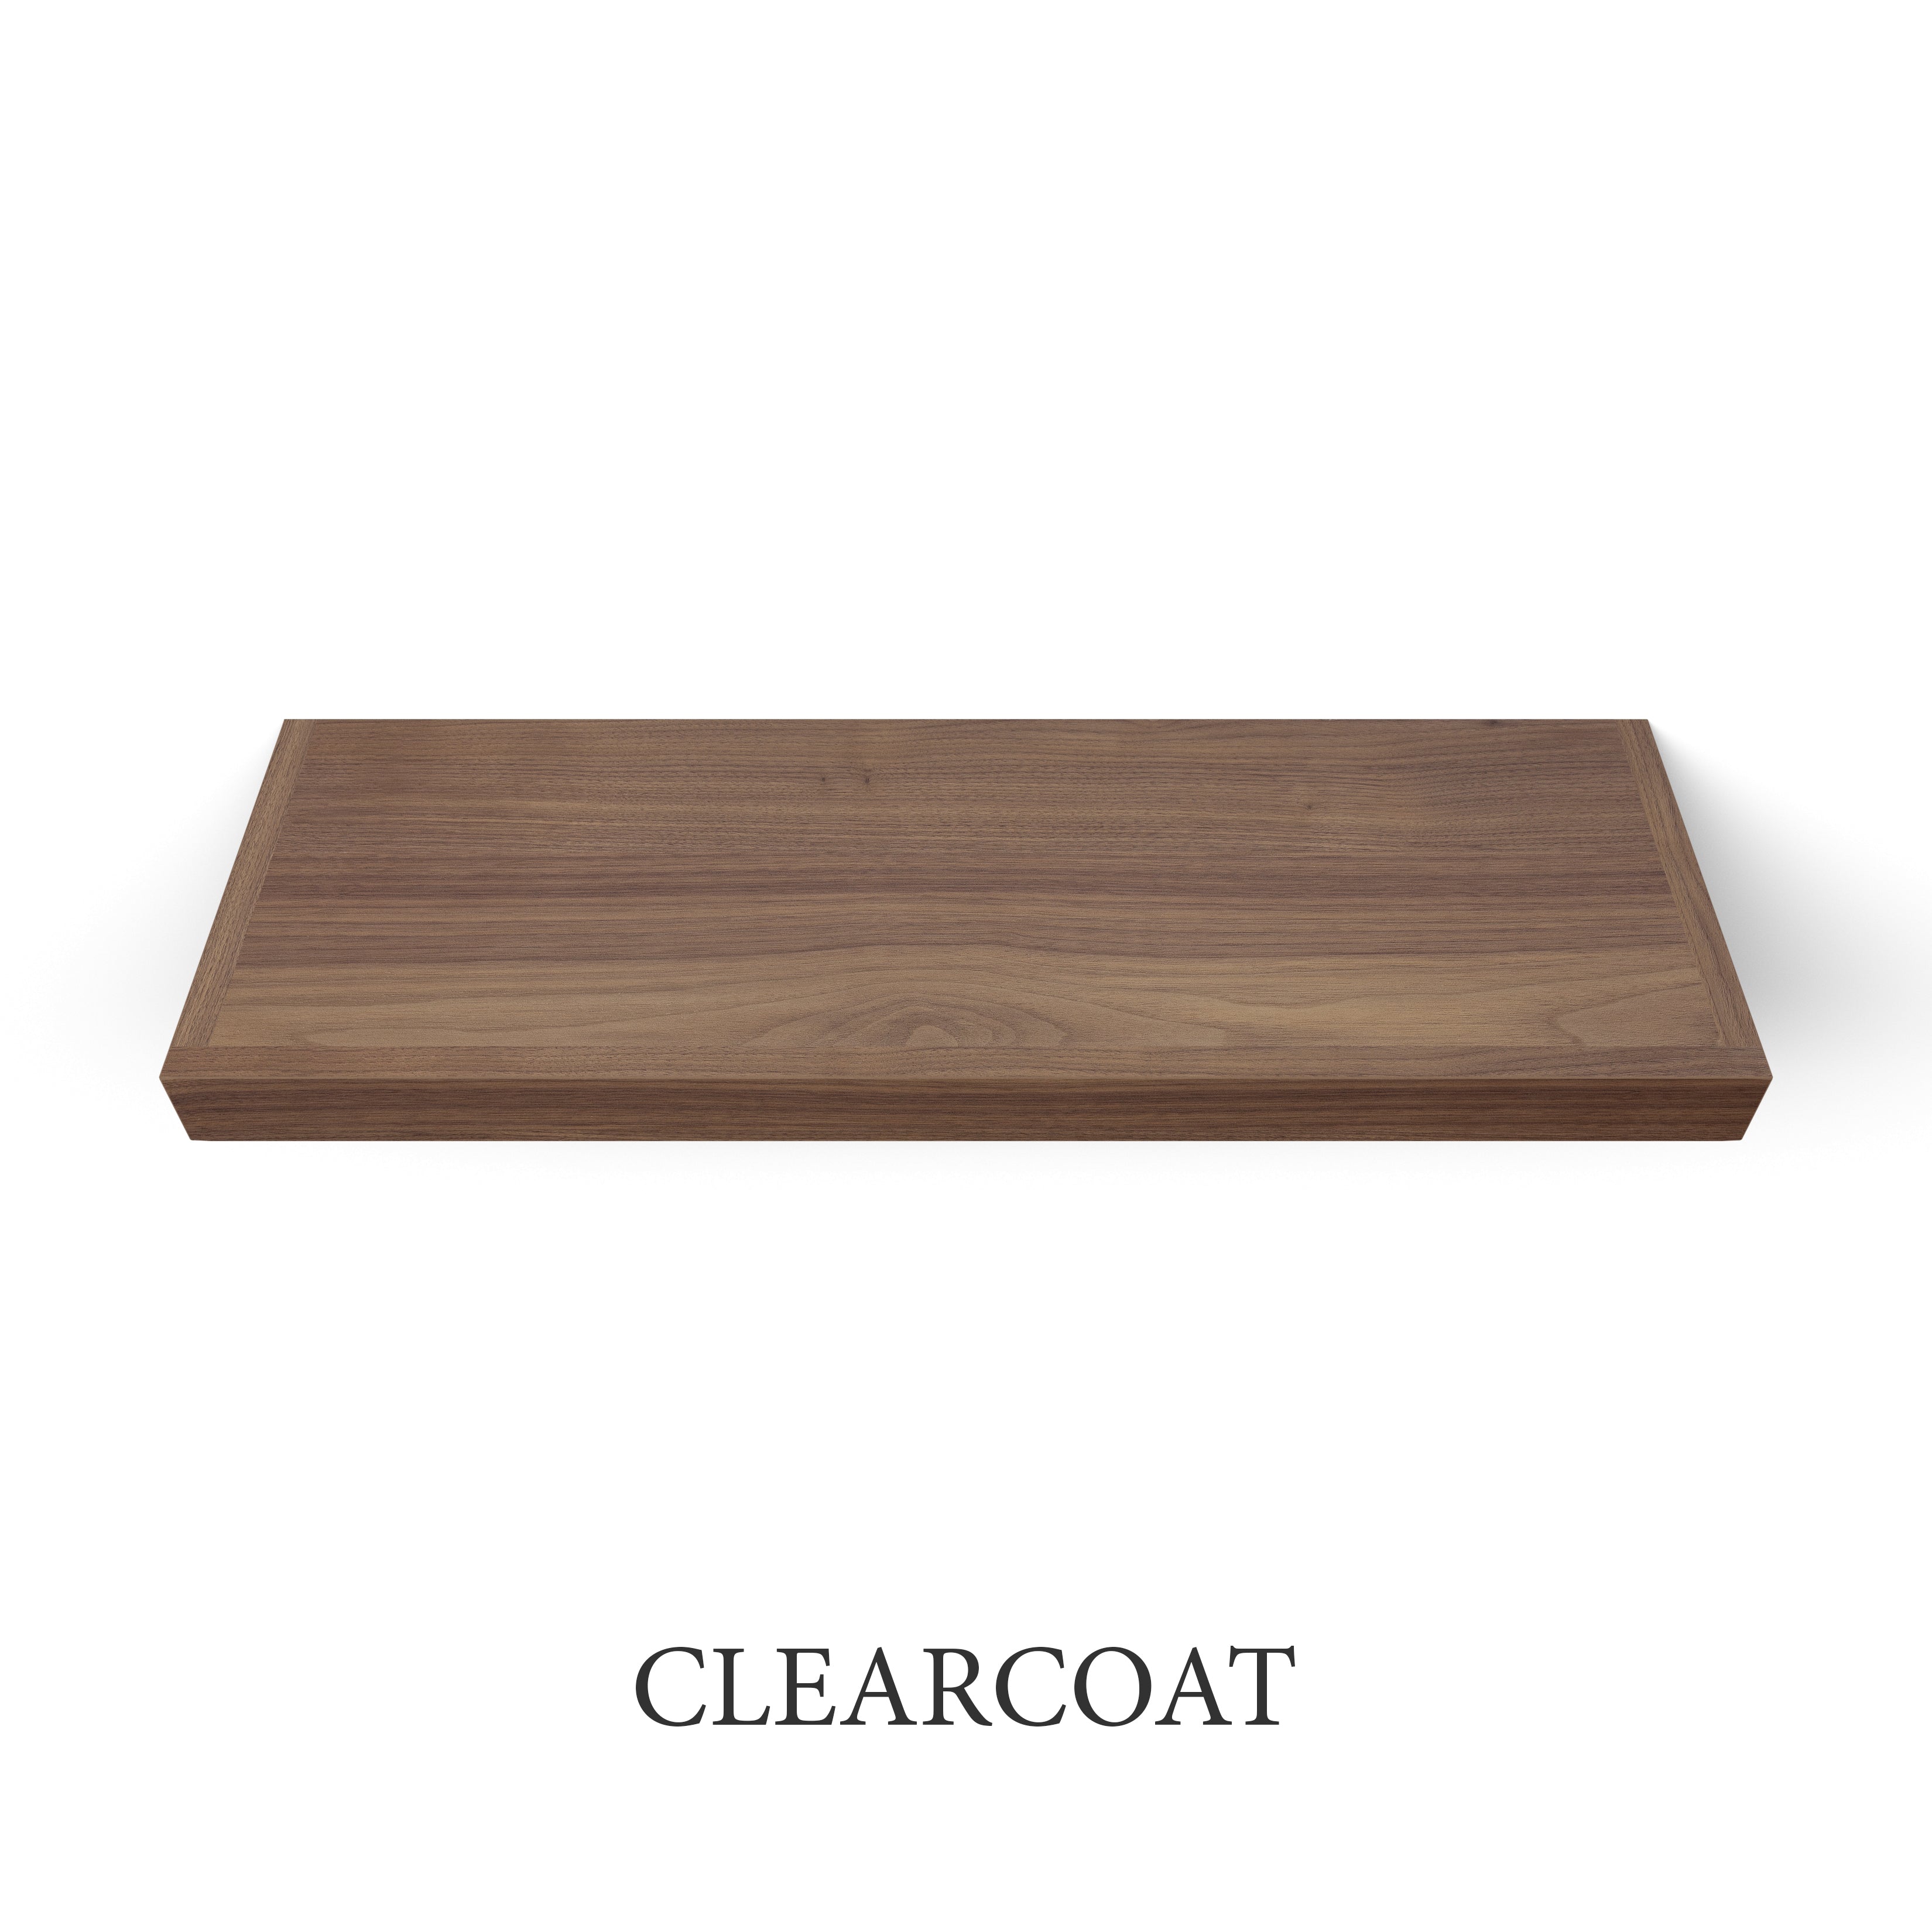 clearcoat Walnut 2 Inch Thick Floating Shelf